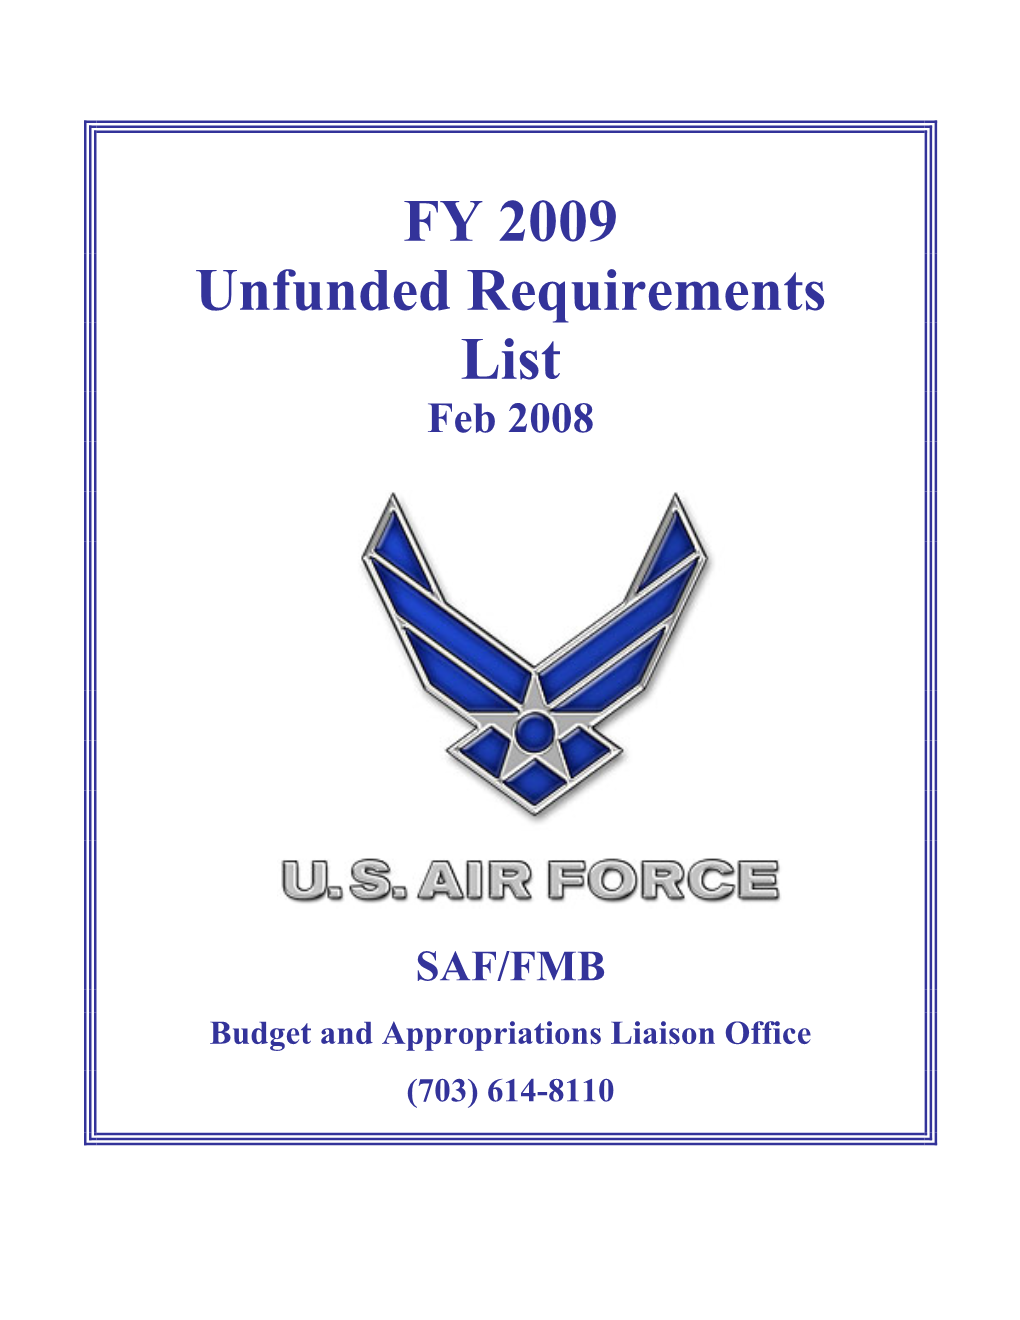 USAF Unfunded Requirements List FY2009